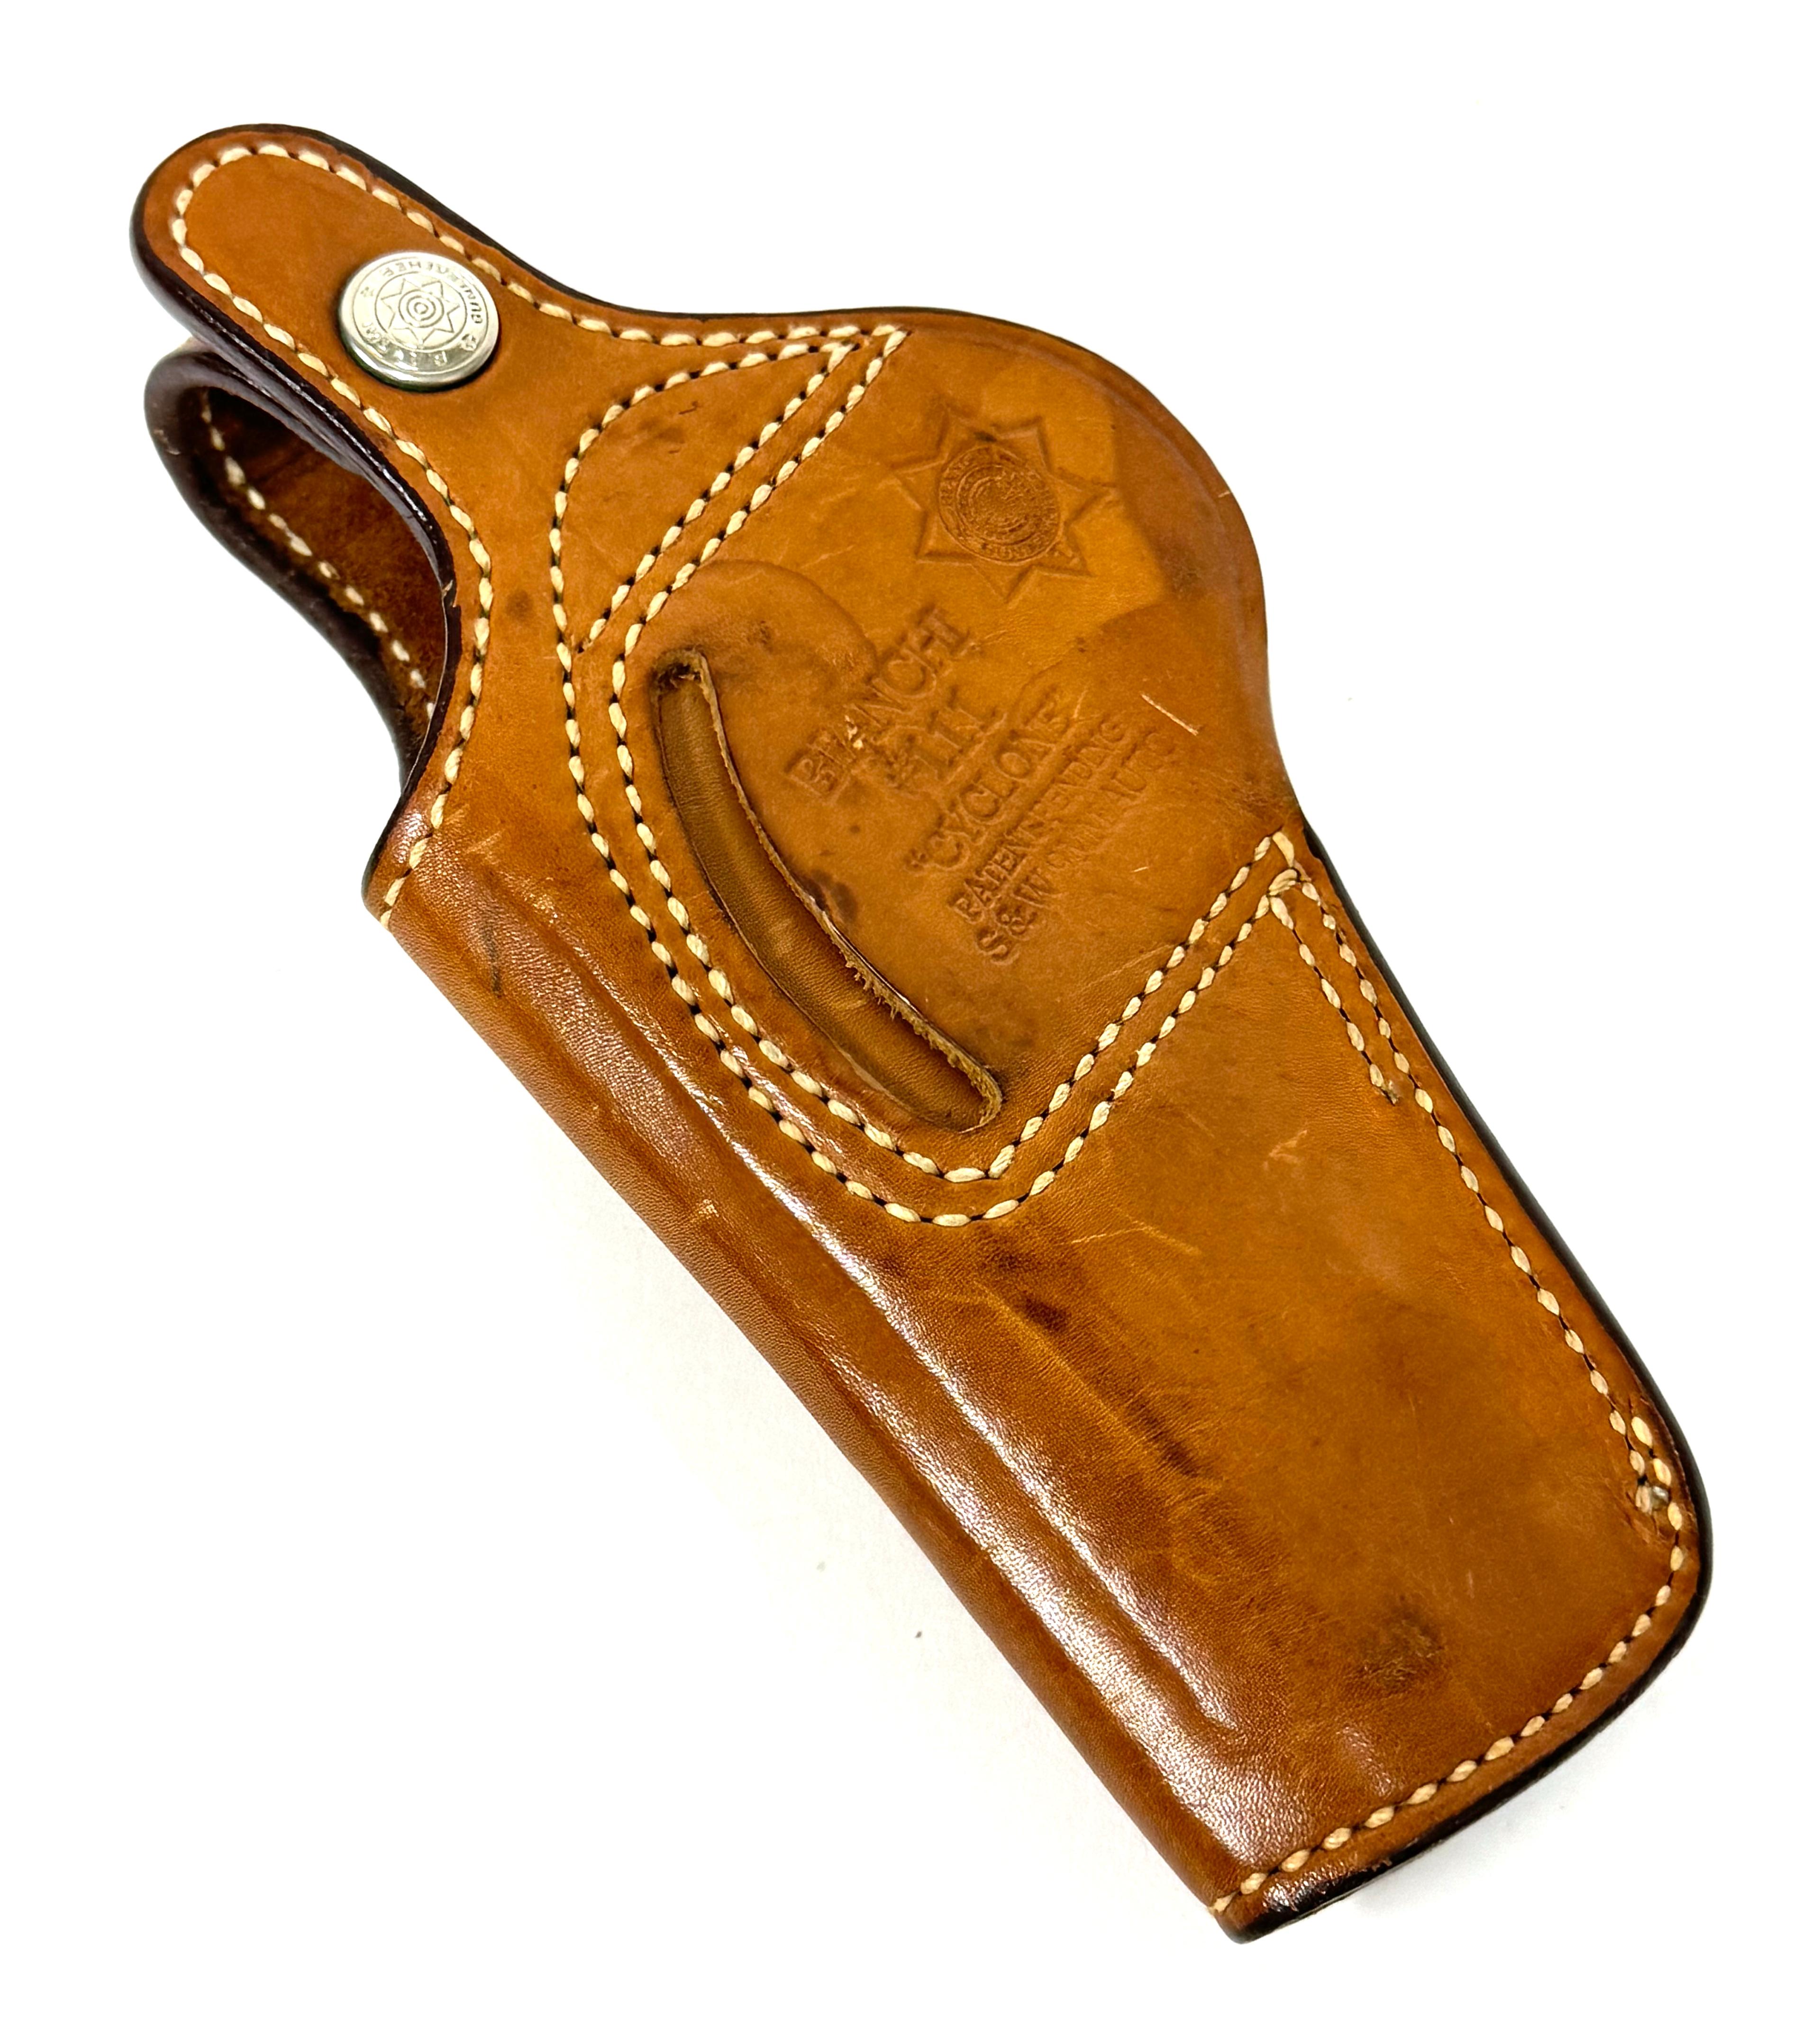 Bianchi #111 “Cyclone” S&W 9MM AUTO Leather Holster